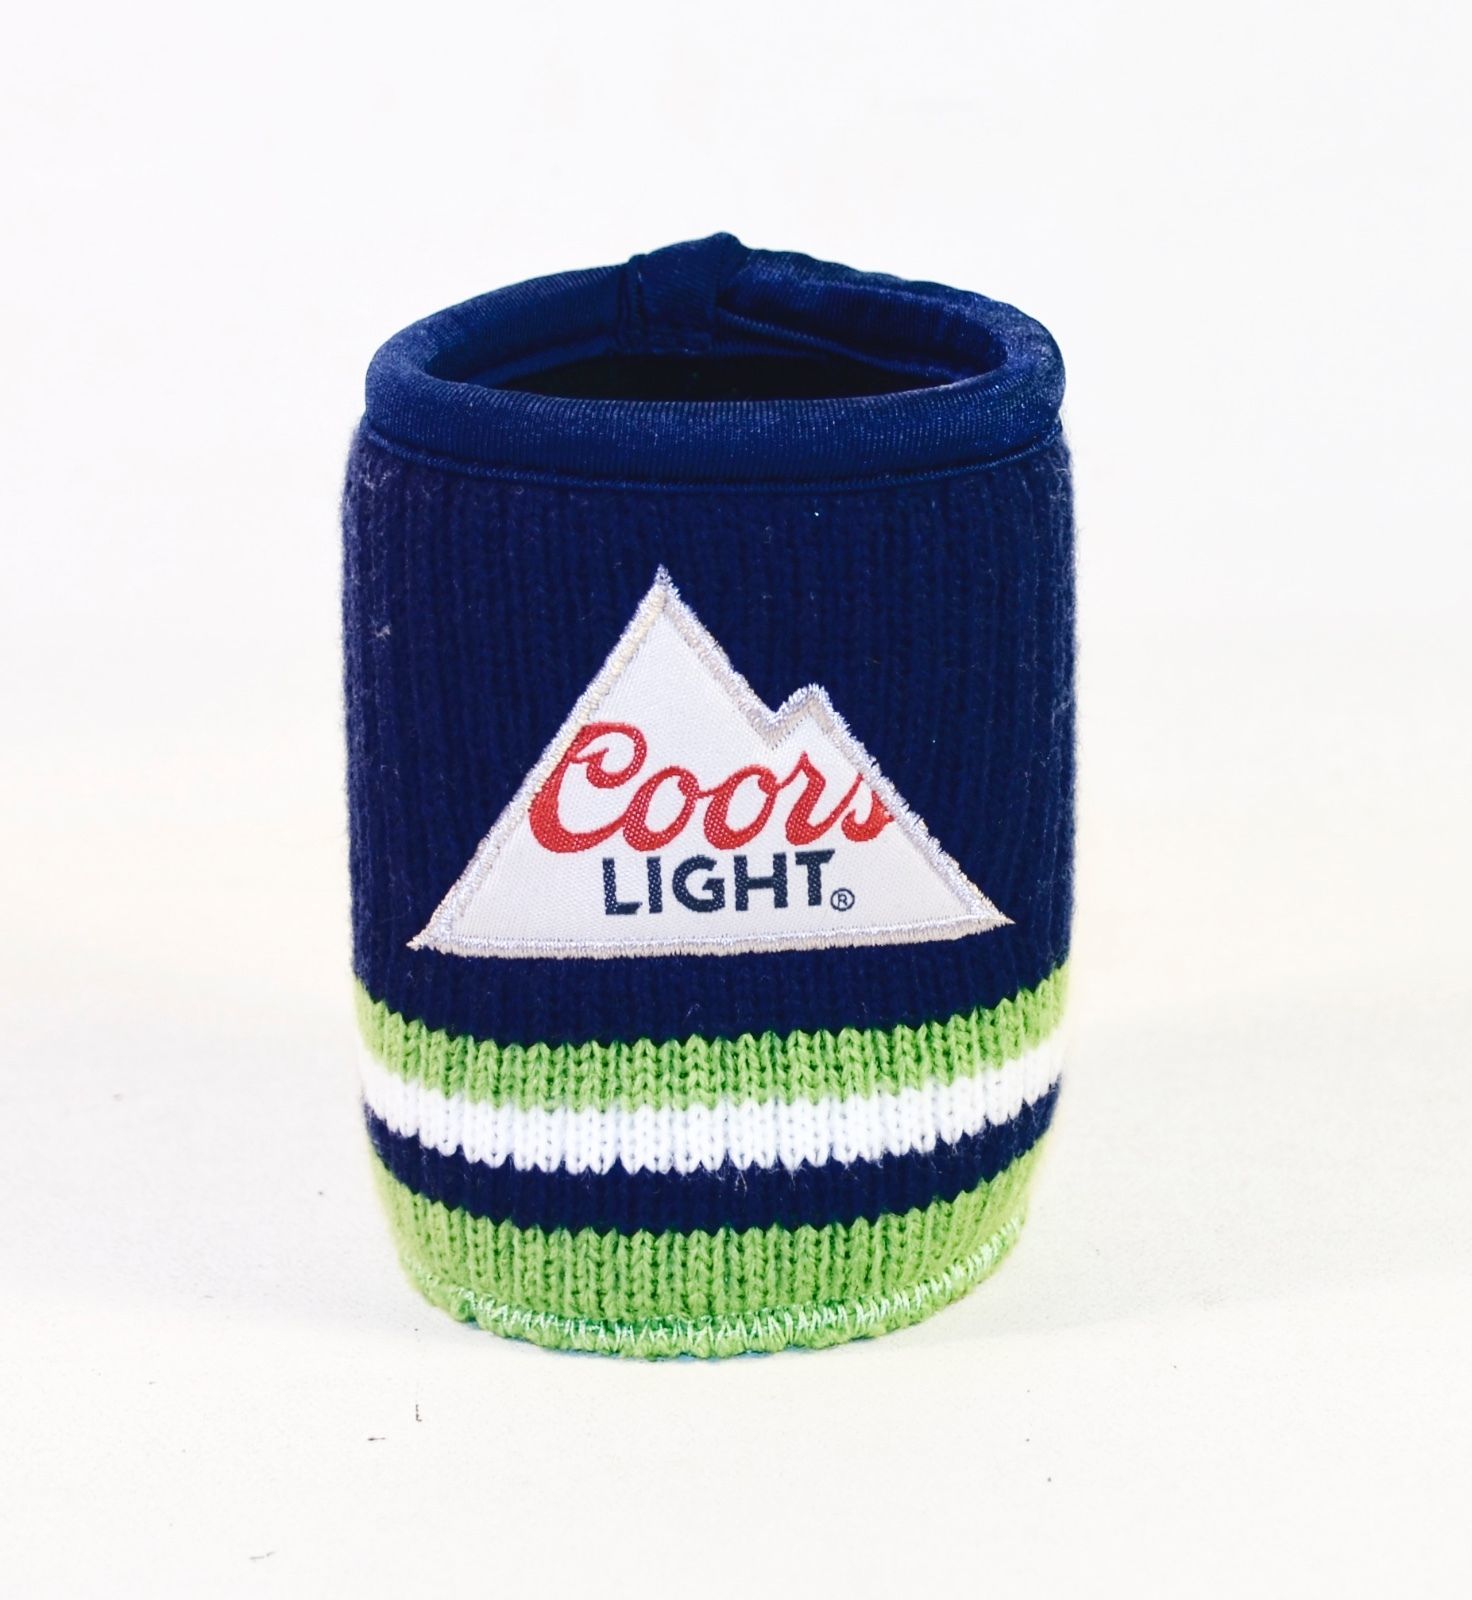 2 Coors Light Foam Beer Coozies /"Born In The Rockies/" Gray Outdoor Drink Coozie